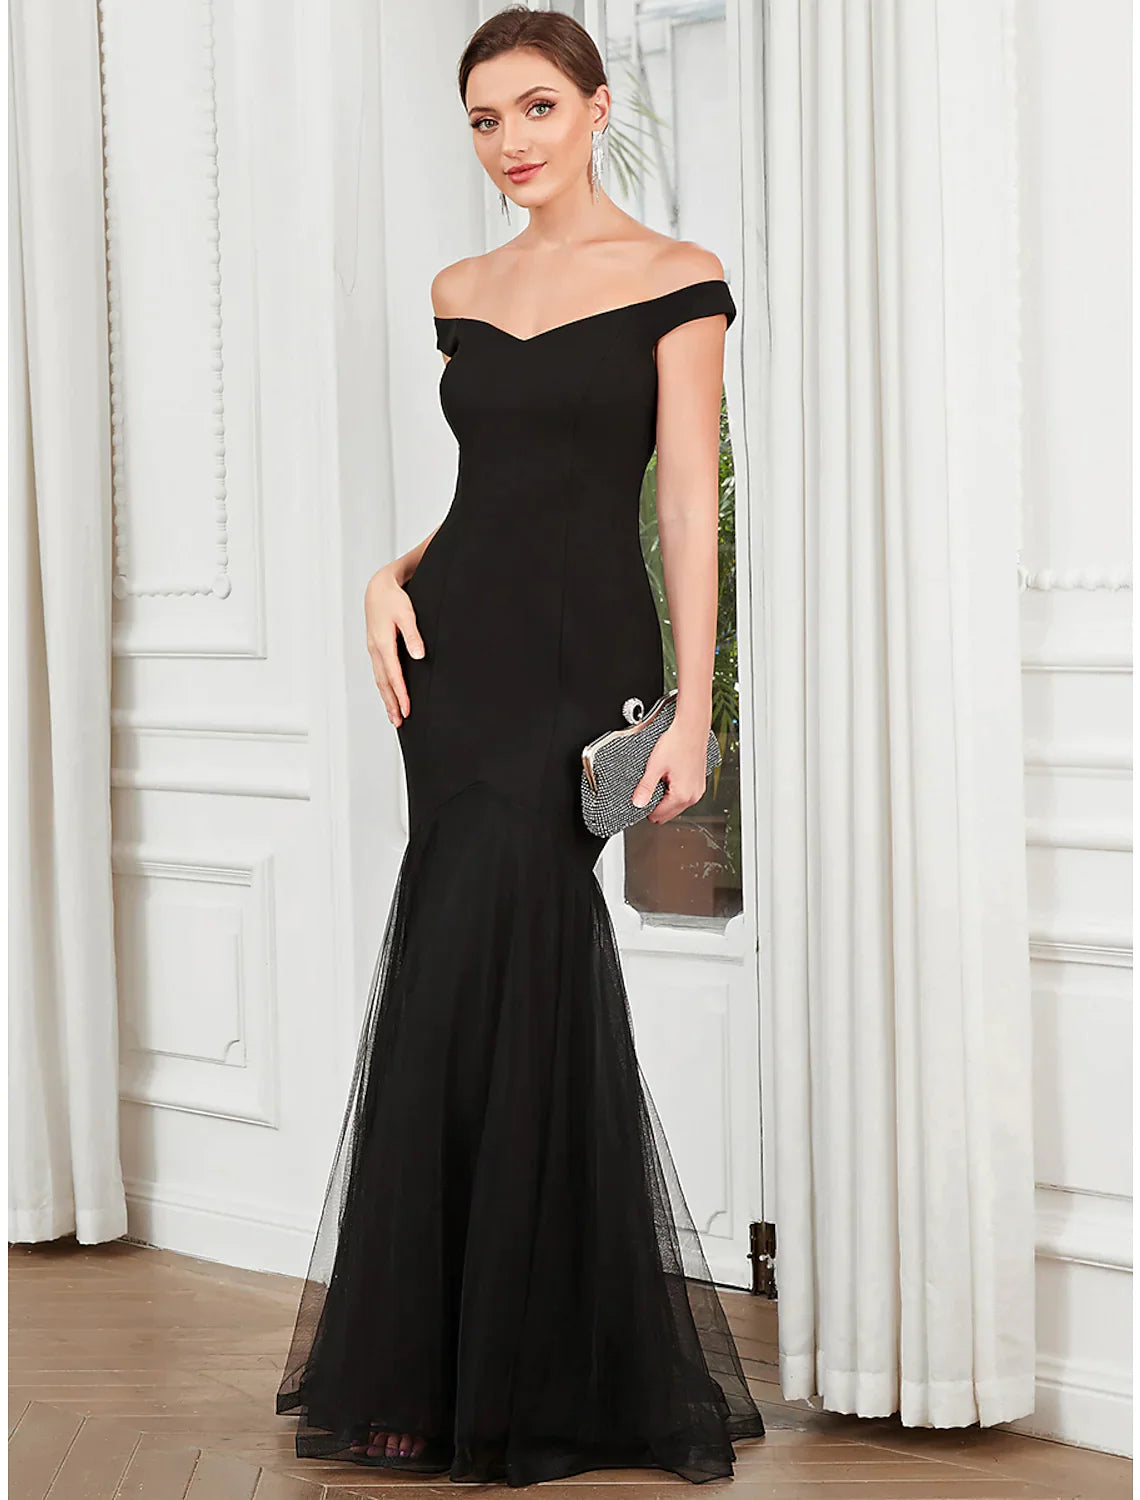 Evening Gown Elegant Dress Party Wear Floor Length Sleeveless Off Shoulder Polyester with Pleats